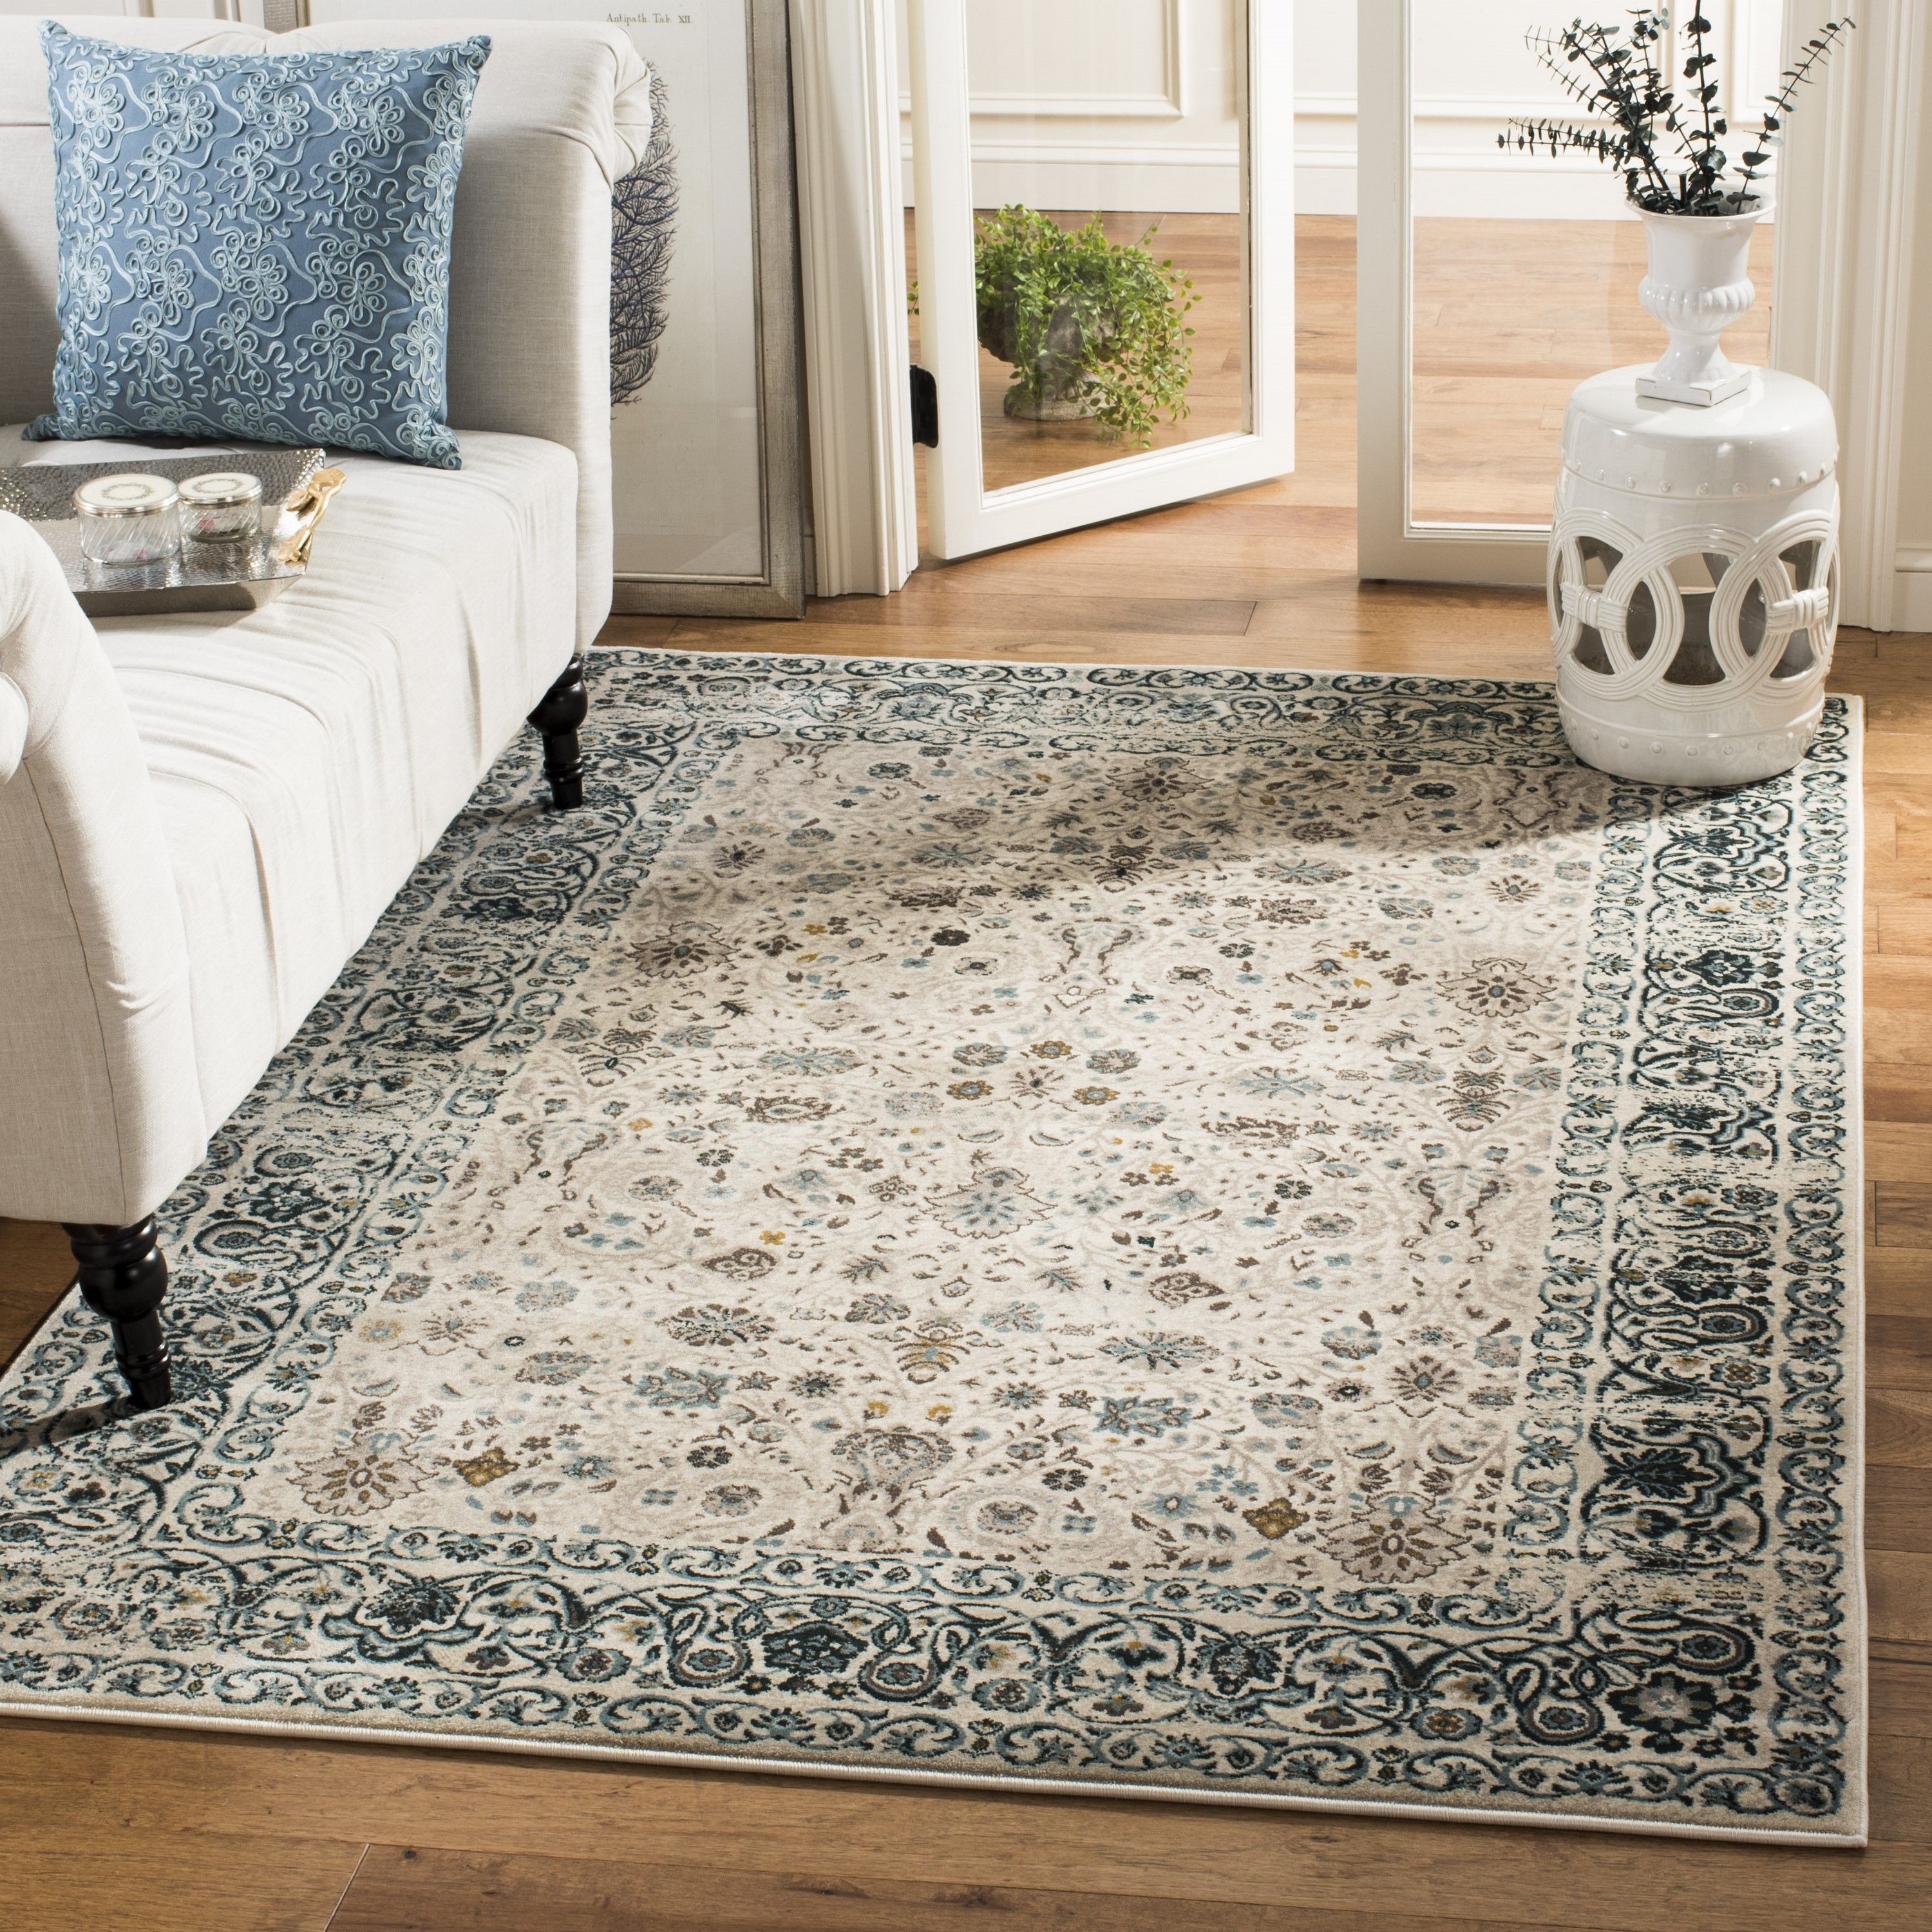 Safavieh Serenity Pasquale 4 X 6 Beige/Blue Indoor Floral/Botanical Vintage  Area Rug In The Rugs Department At Lowes With Regard To White Serenity Rugs (View 13 of 15)